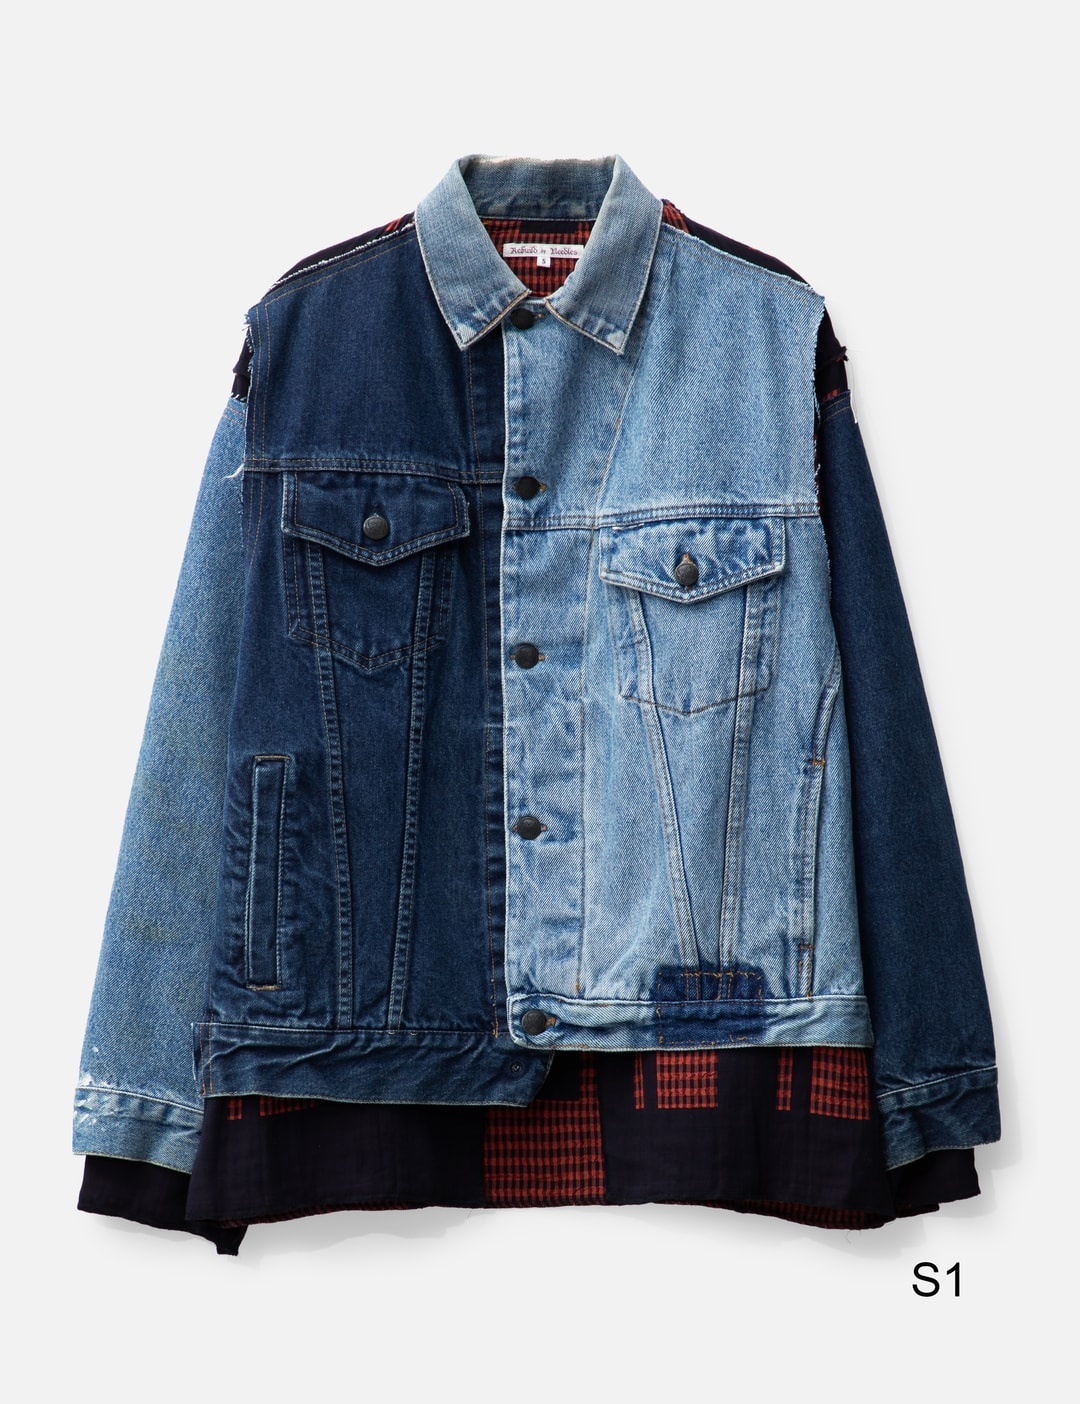 JEAN COVERED JACKET - 6